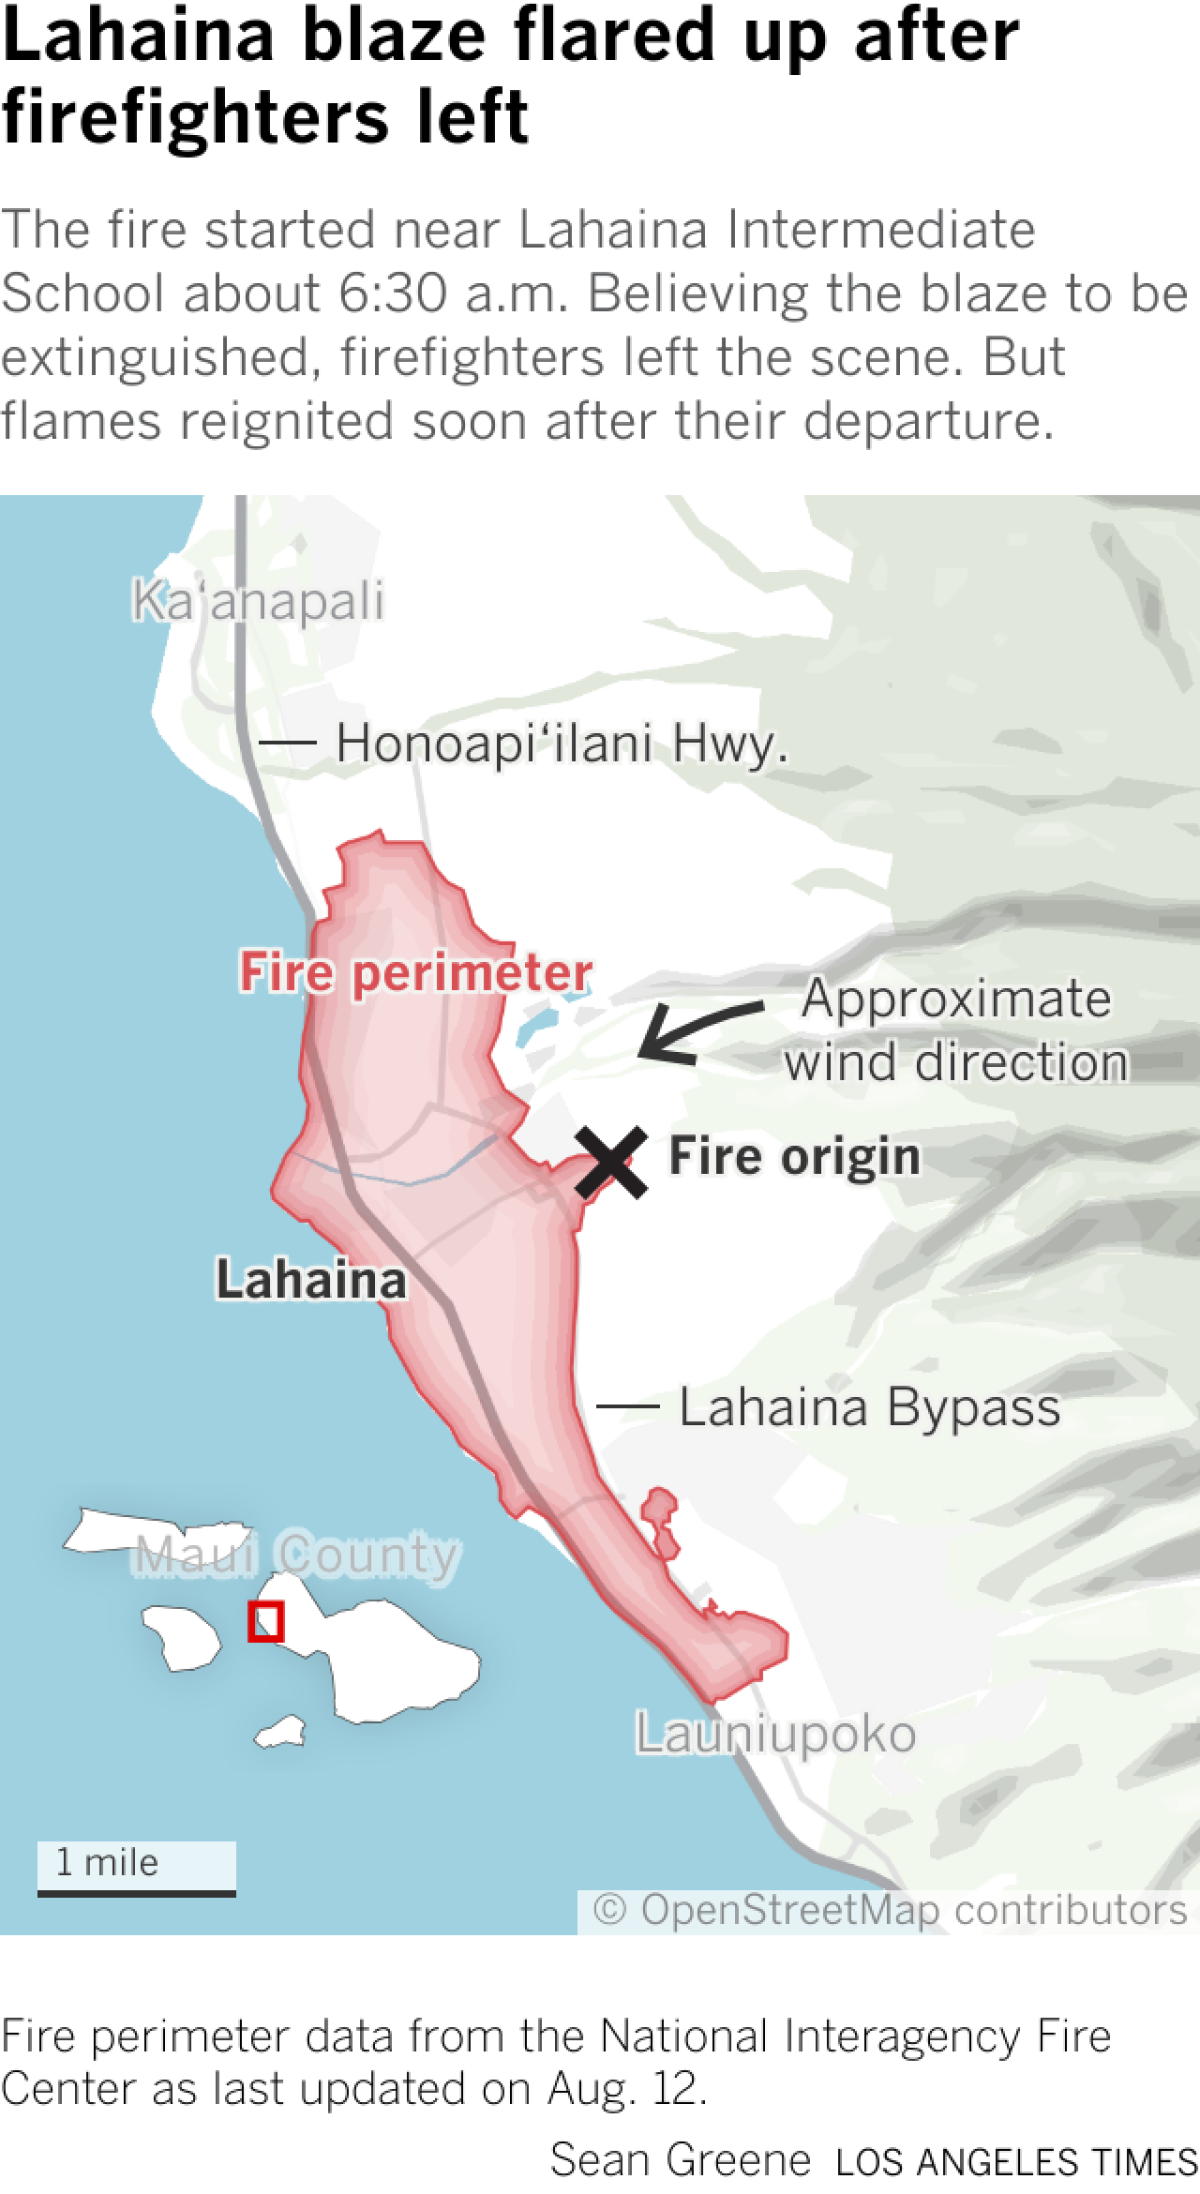 A map of Lahaina shows two exits out of town along Honoapiilani Highway.